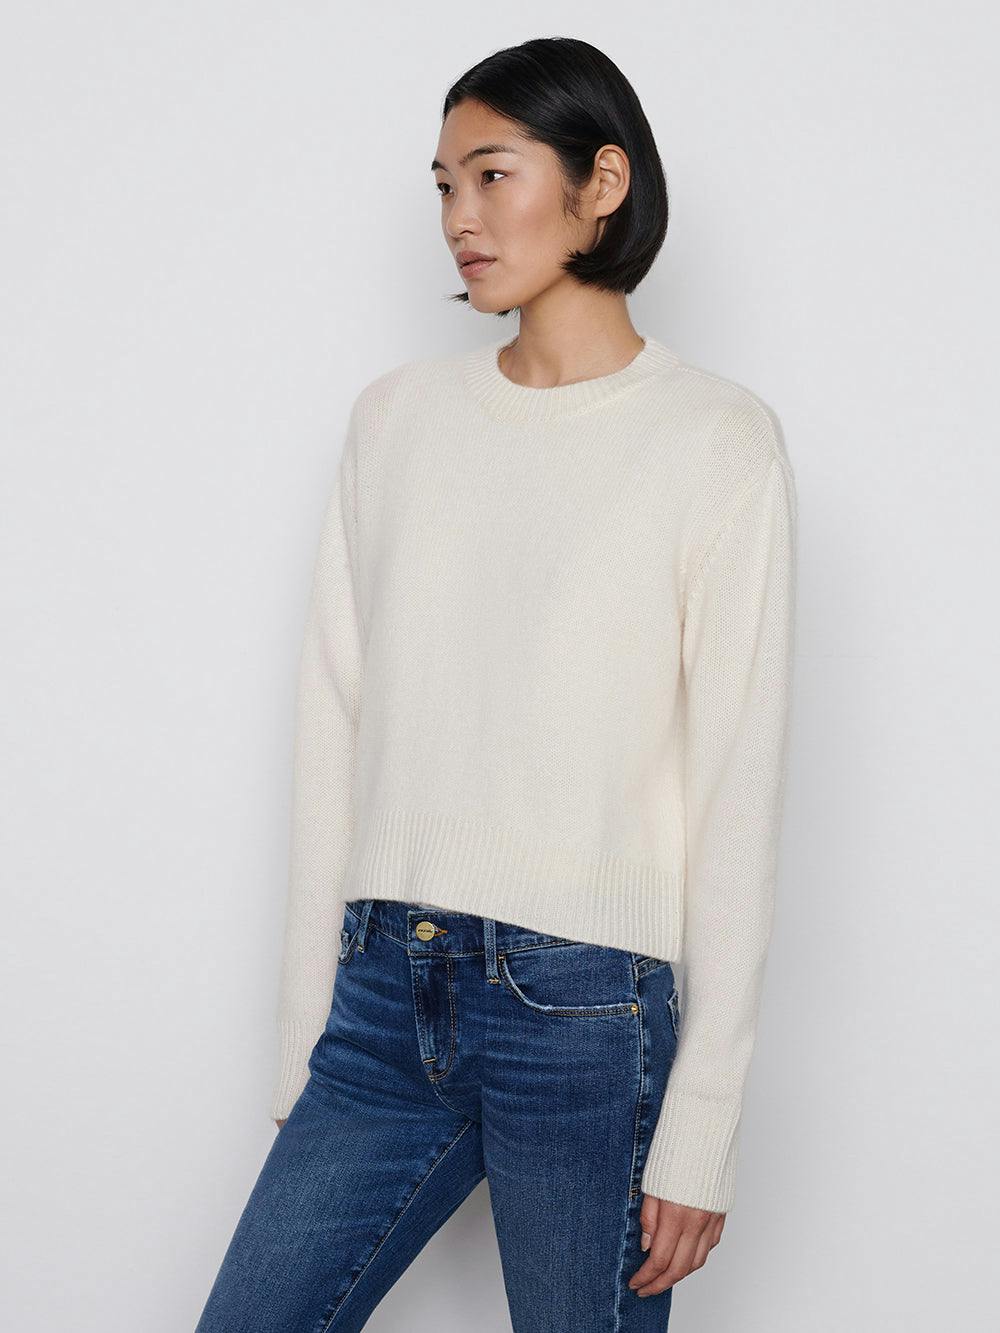 sweater side view 